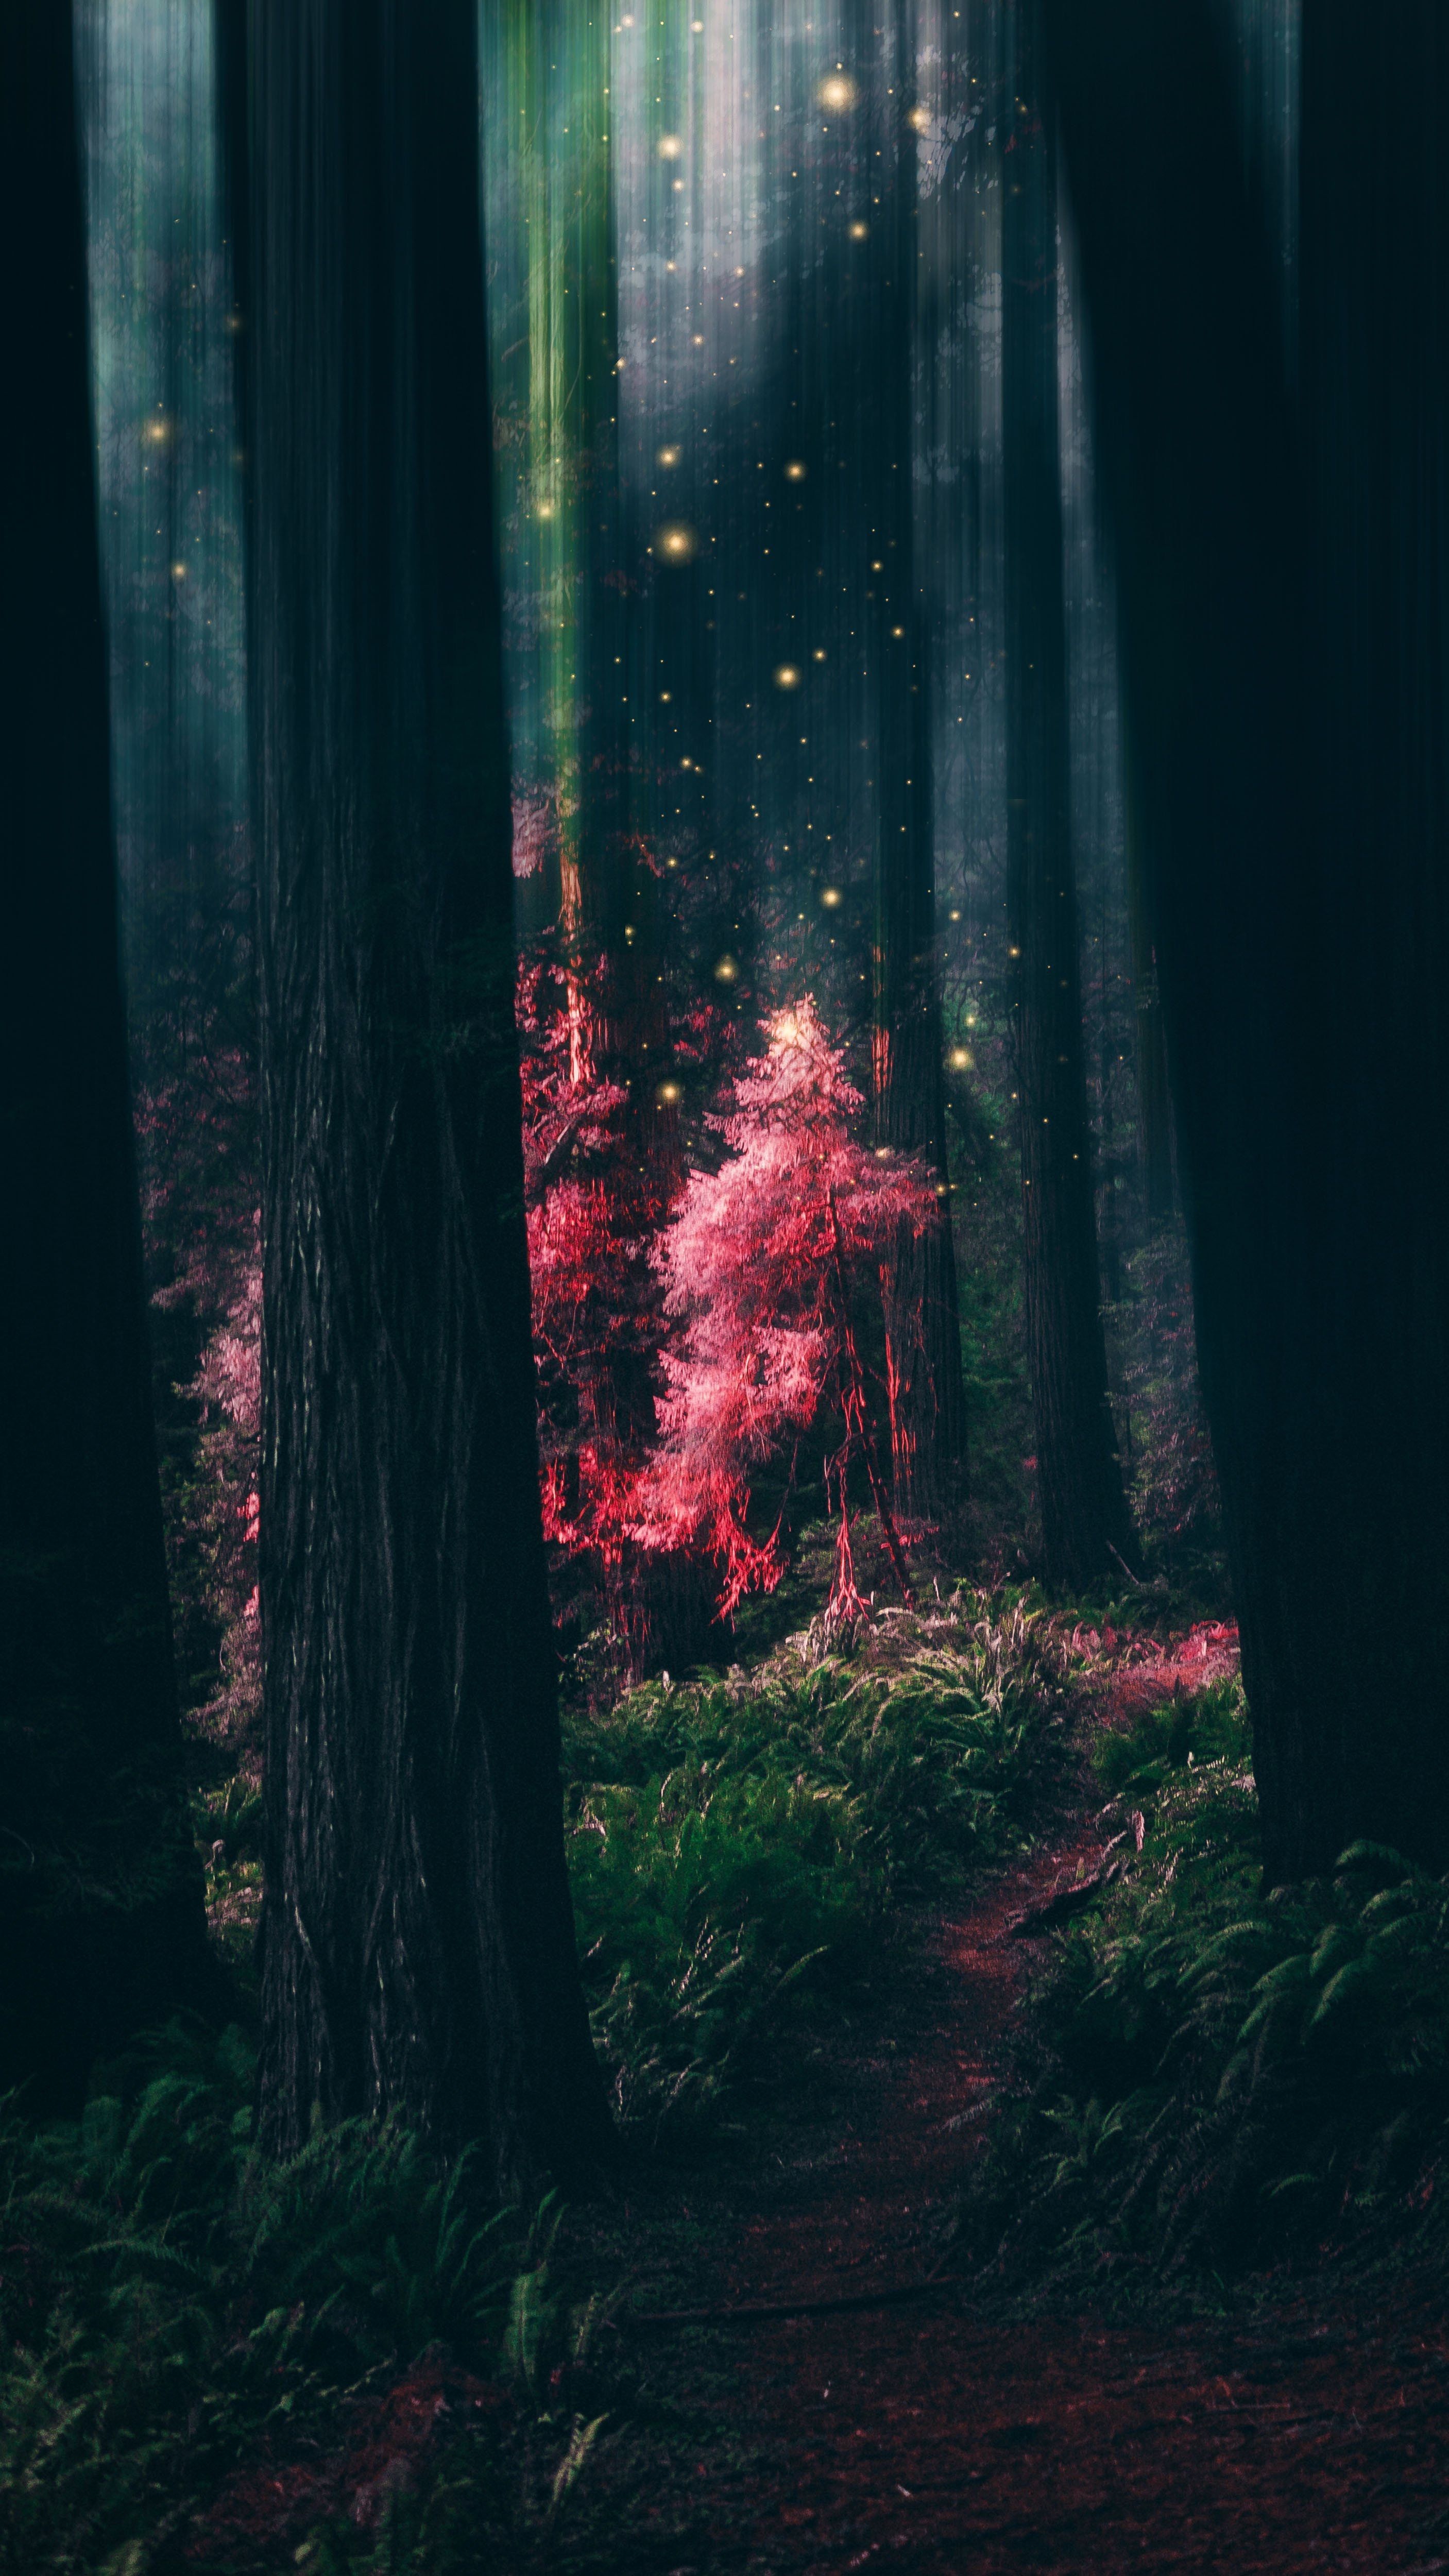 Japanese Forest iPhone Wallpaper